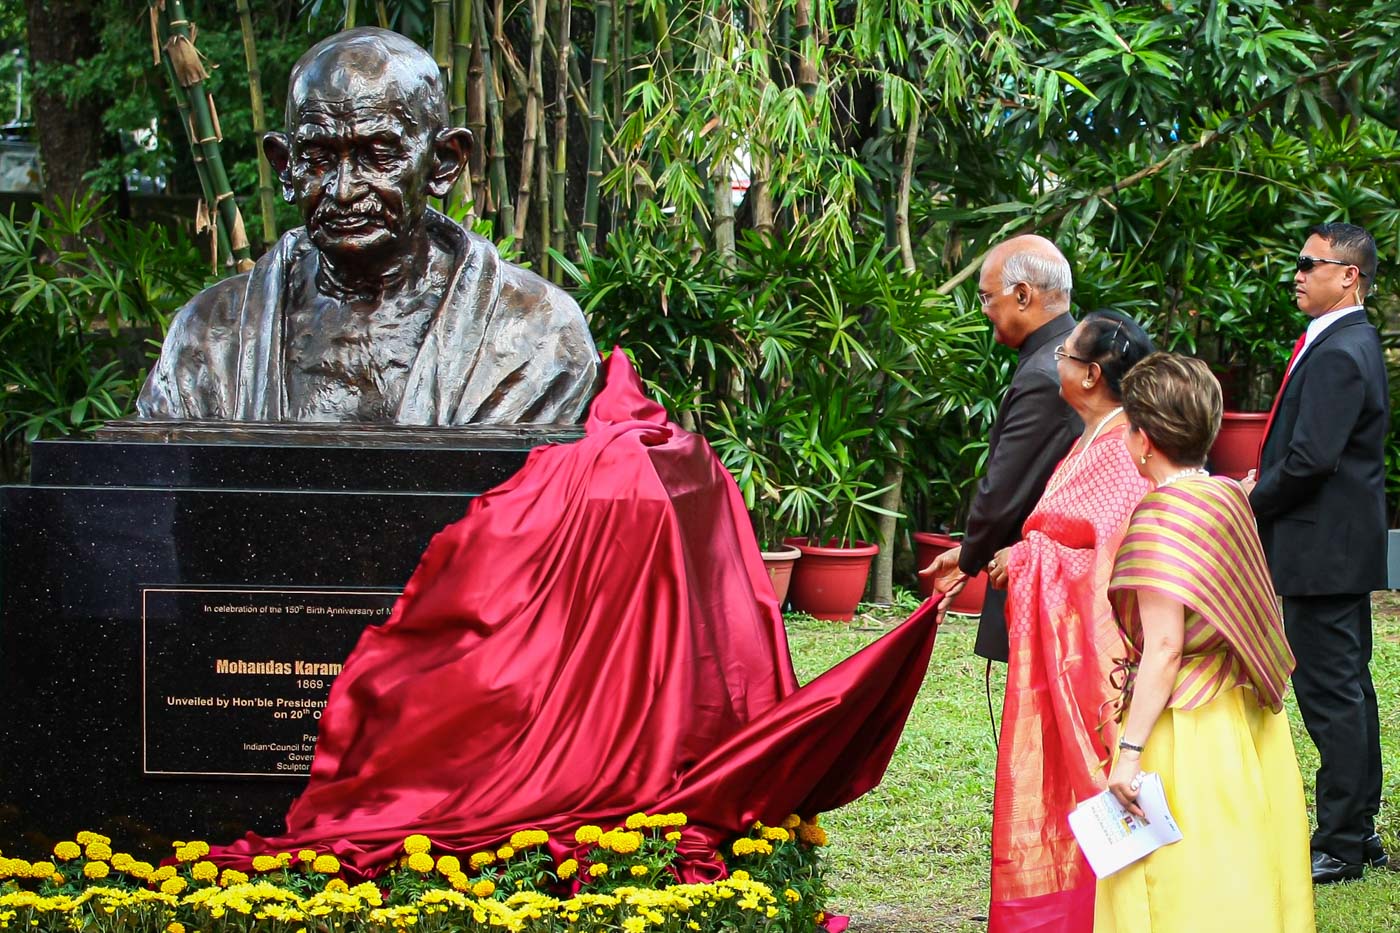 Indian President Ram Nath Kovind unveils a bust of Mahatma Gandhi, Father of the Indian Nation and a symbol of peace, at the Miriam College in Quezon City. This is the first Gandhi bust installed in the Philippines. Renowned Indian sculptor Ram Vanji Sutar designed the bronze bust, which was flown from India. Photo by Jire Carreon/Rappler 